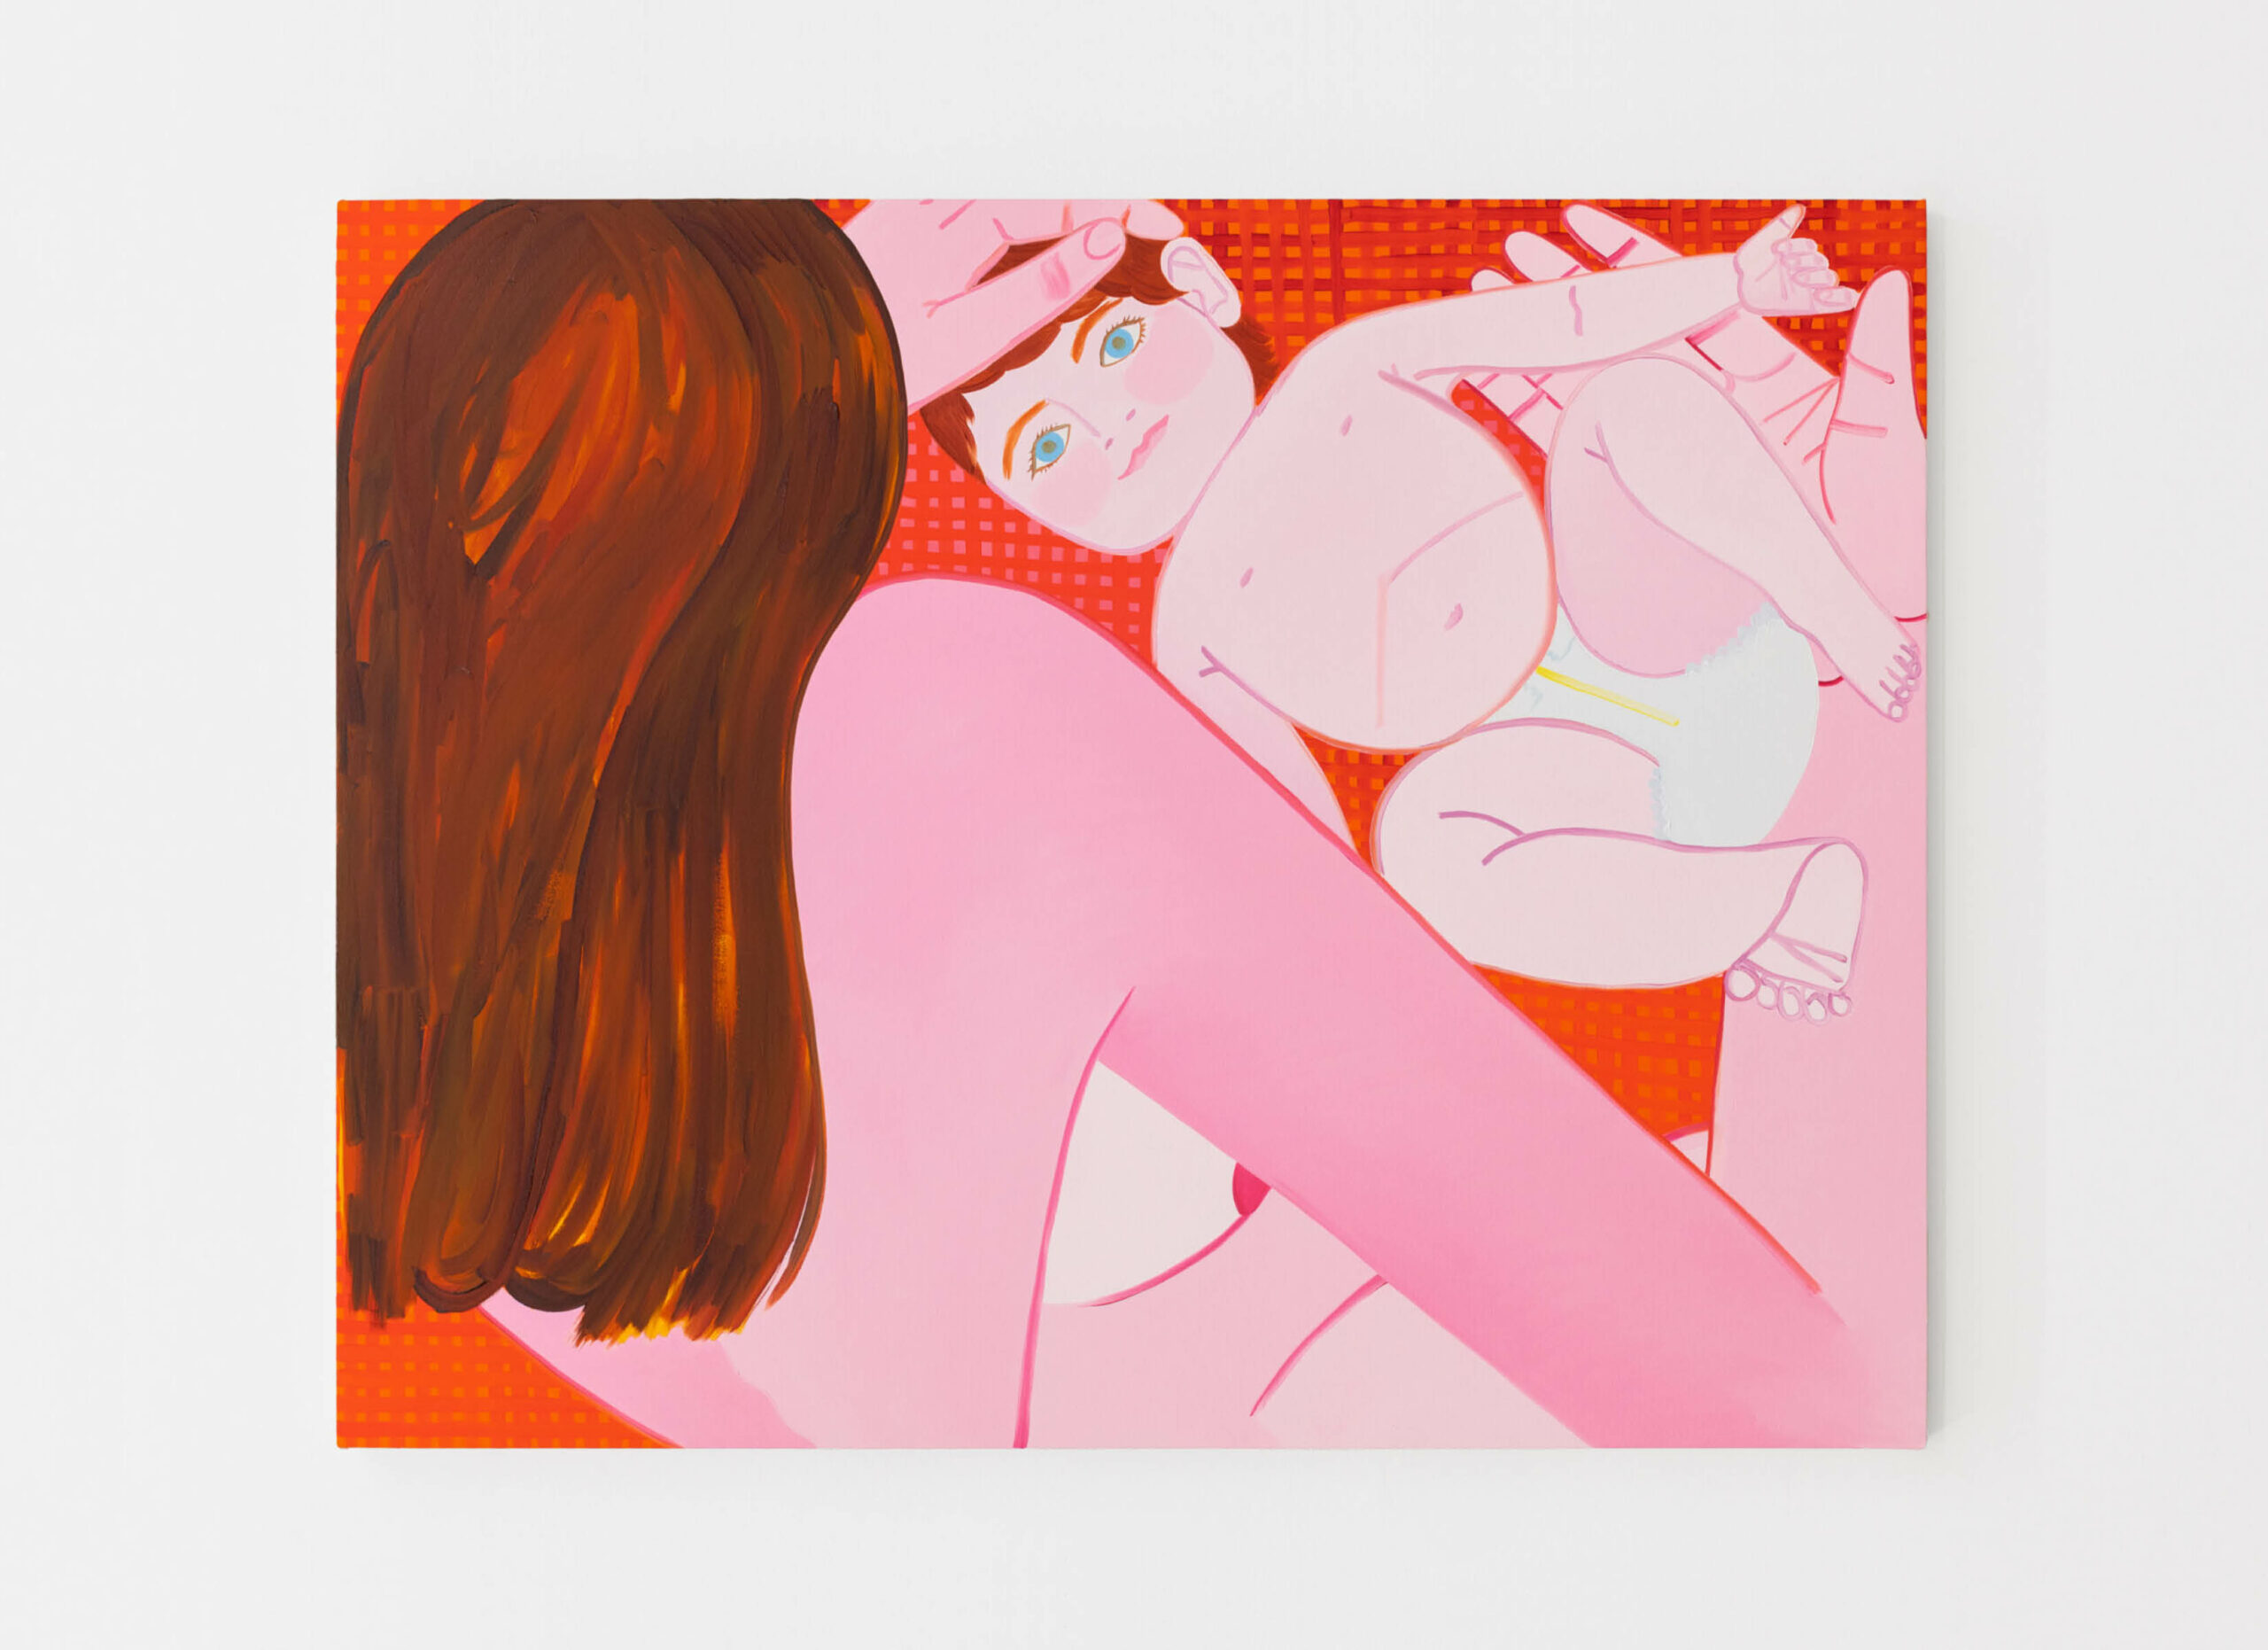 Overall image of Madeline Donahue's "Circle." "Circle" depicts the mother’s perspective; she covers her baby’s body with a diaper and encircles the baby in an embrace. The mother is nude and vulnerable, the baby is protected and connected, their eyes locked on eachother.